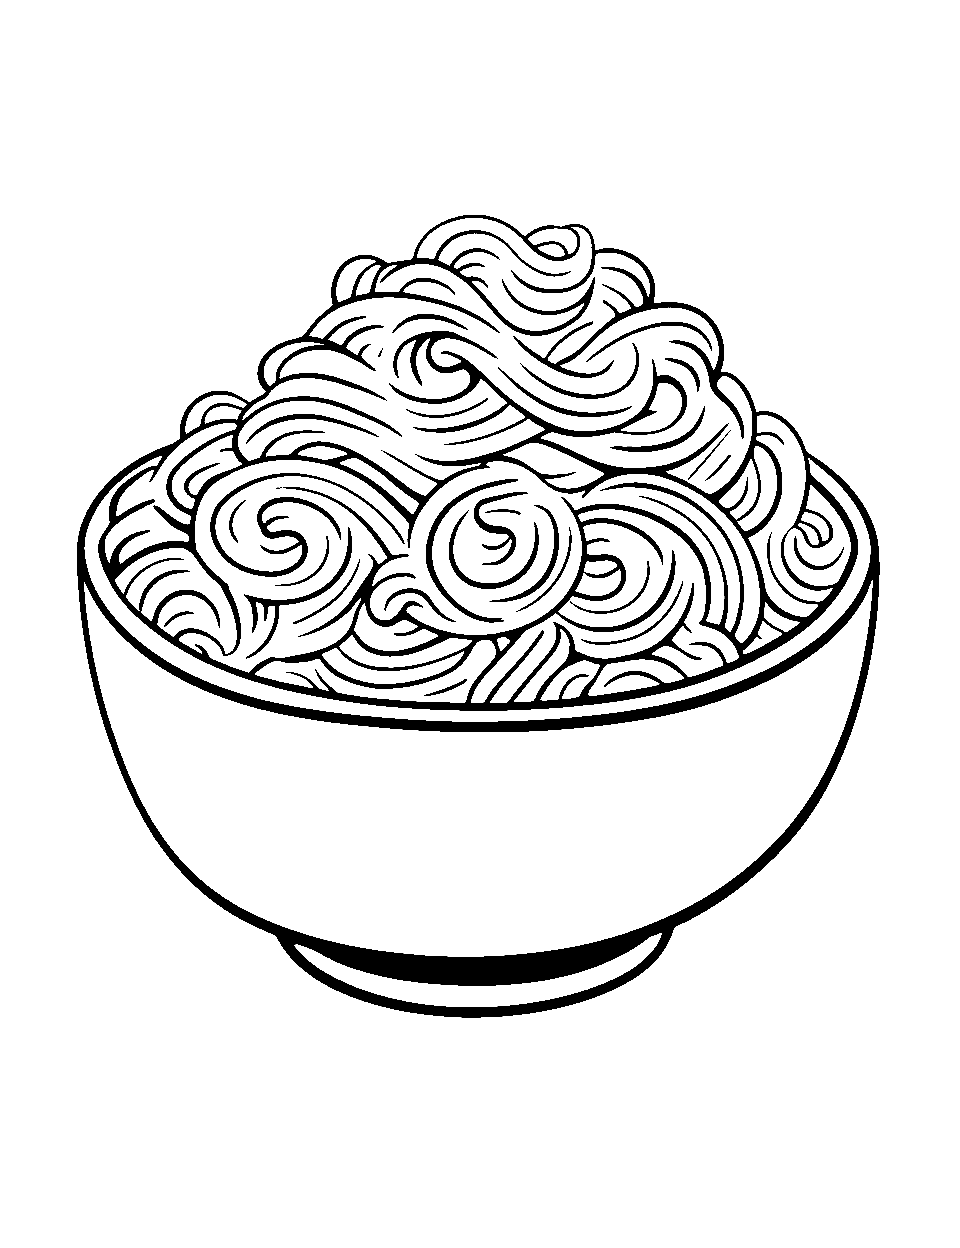 Doodle Pasta Bowl Food Coloring Page - A bowl full of curly spaghetti.